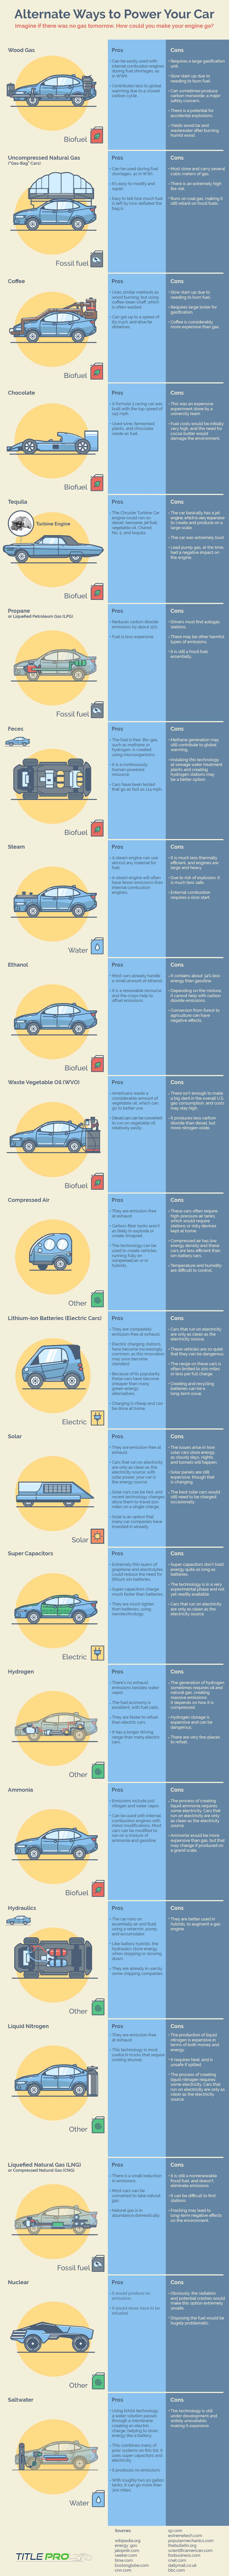 21 Ways to Power Your Car Without Gasoline